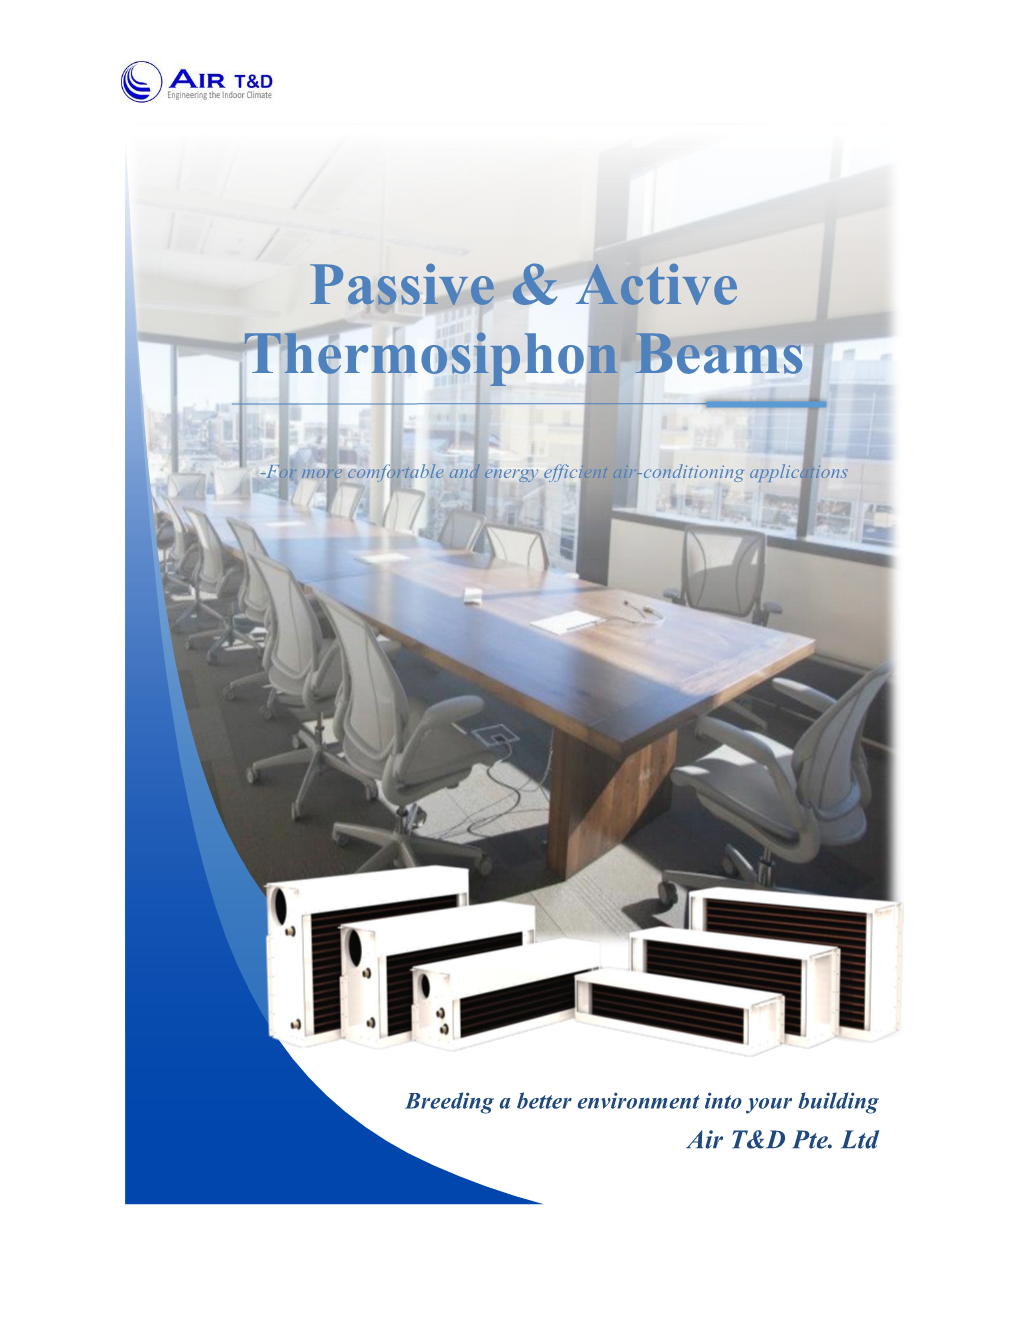 Passive & Active Thermosiphon Beams